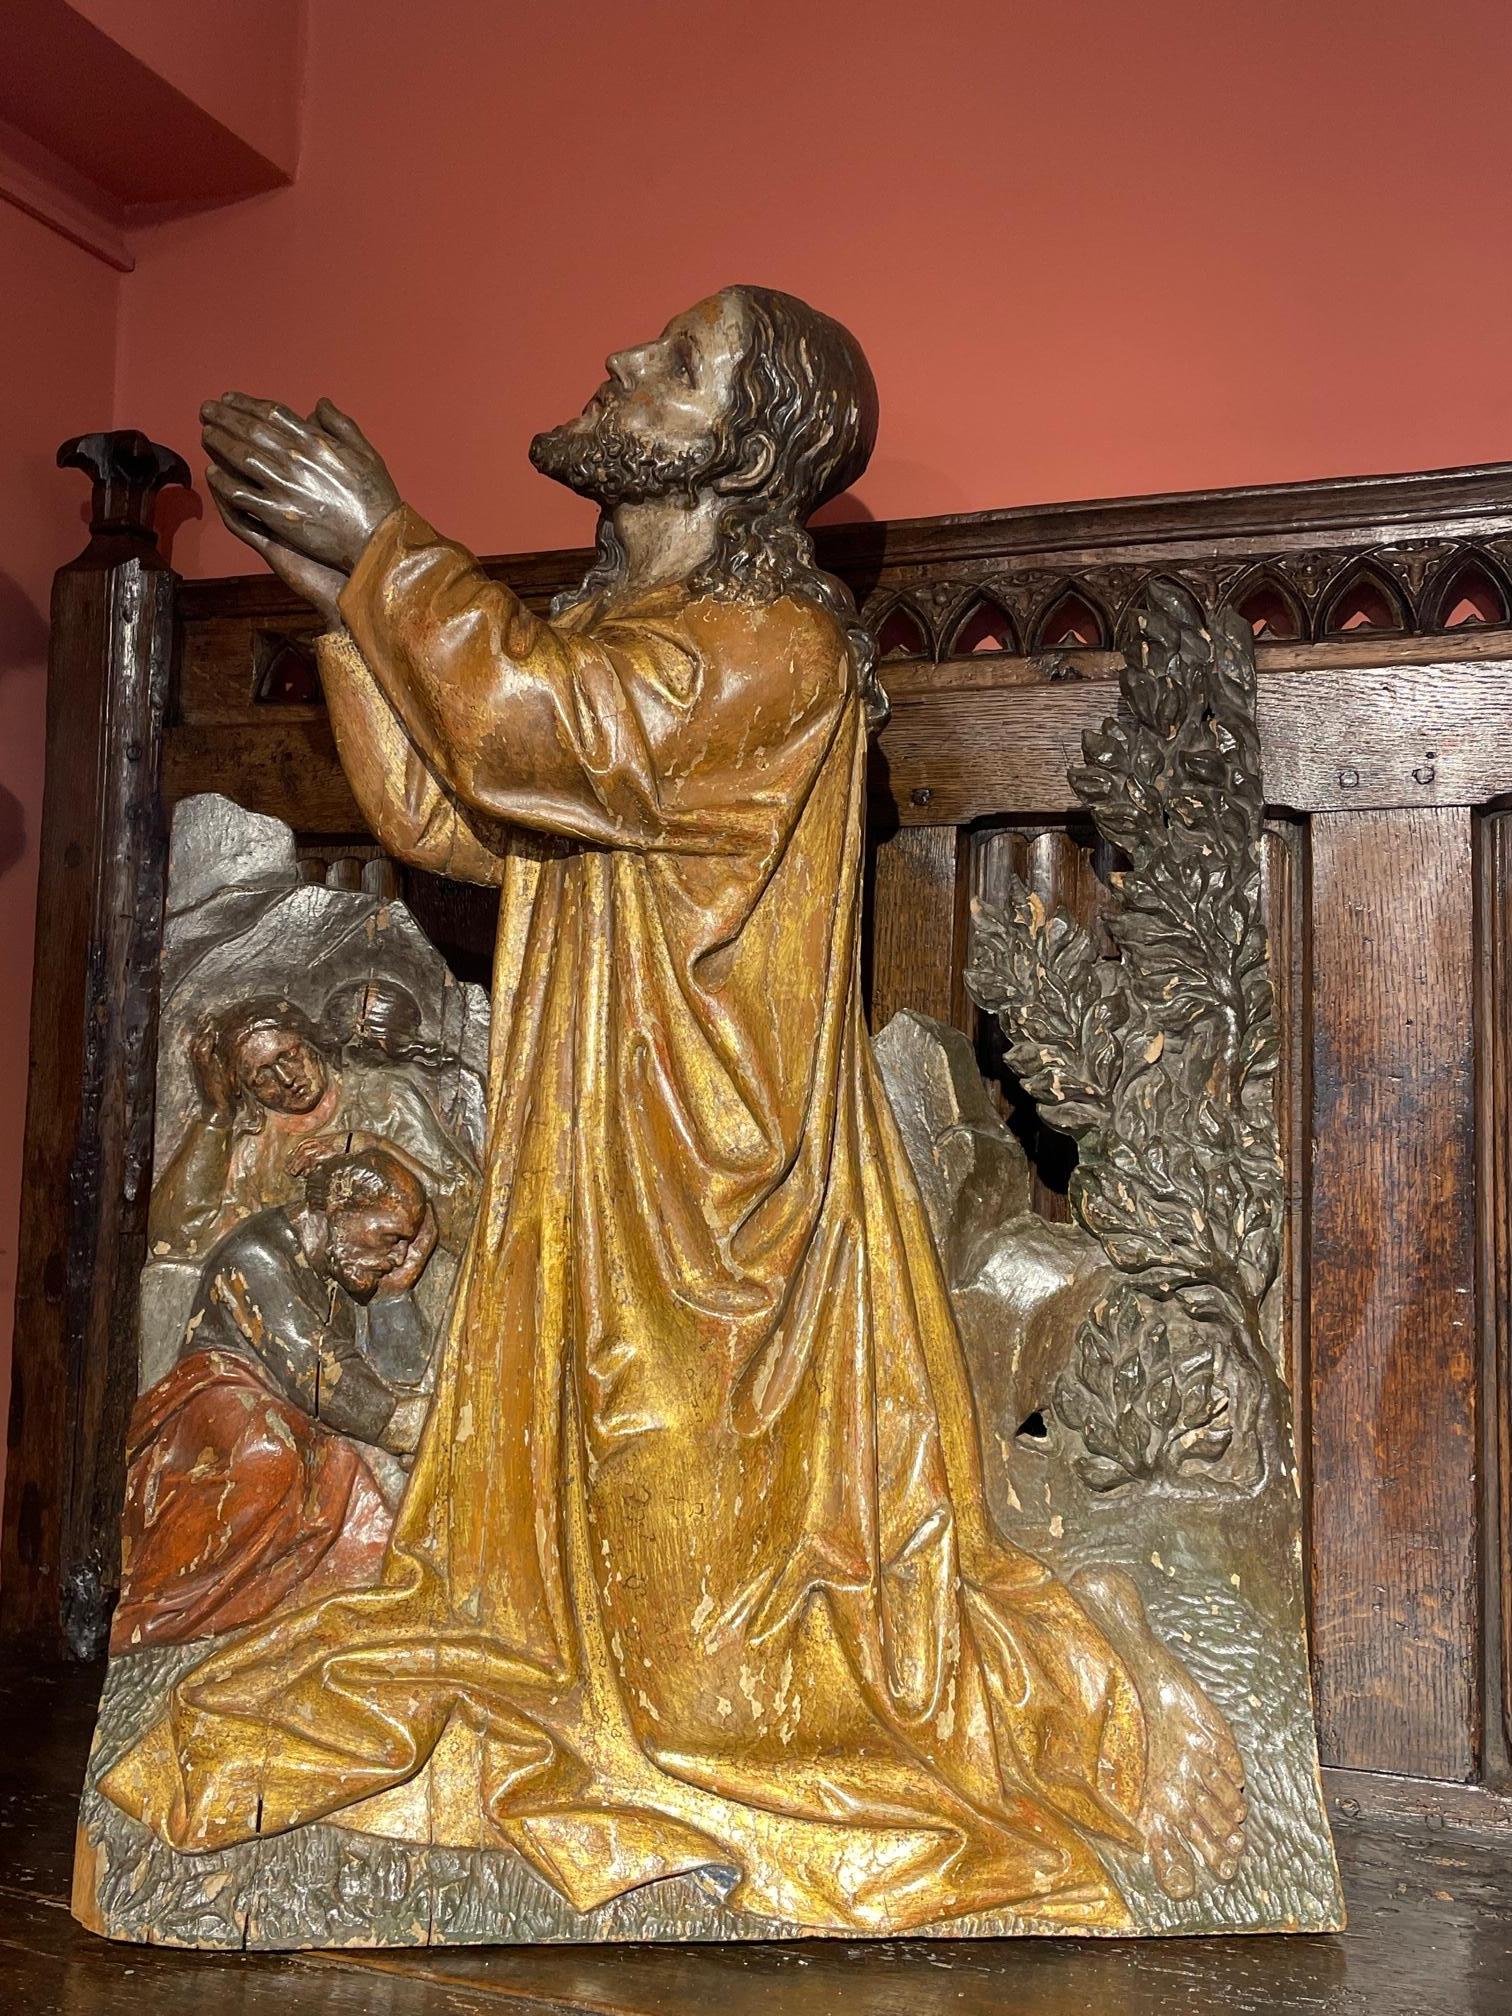 IMPORTANT POLYCHROME LOW-RELIEF DEPICTING CHRIST IN THE MOUNT OF OLIVES

ORIGIN: SOUTH GERMANY or ALSACE 
PERIOD: ca. 1500-1510

Height : 78 cm
Length : 57 cm
Depth : 8 cm

Limewood
Good condition


This scene of Christ praying in the Mount of